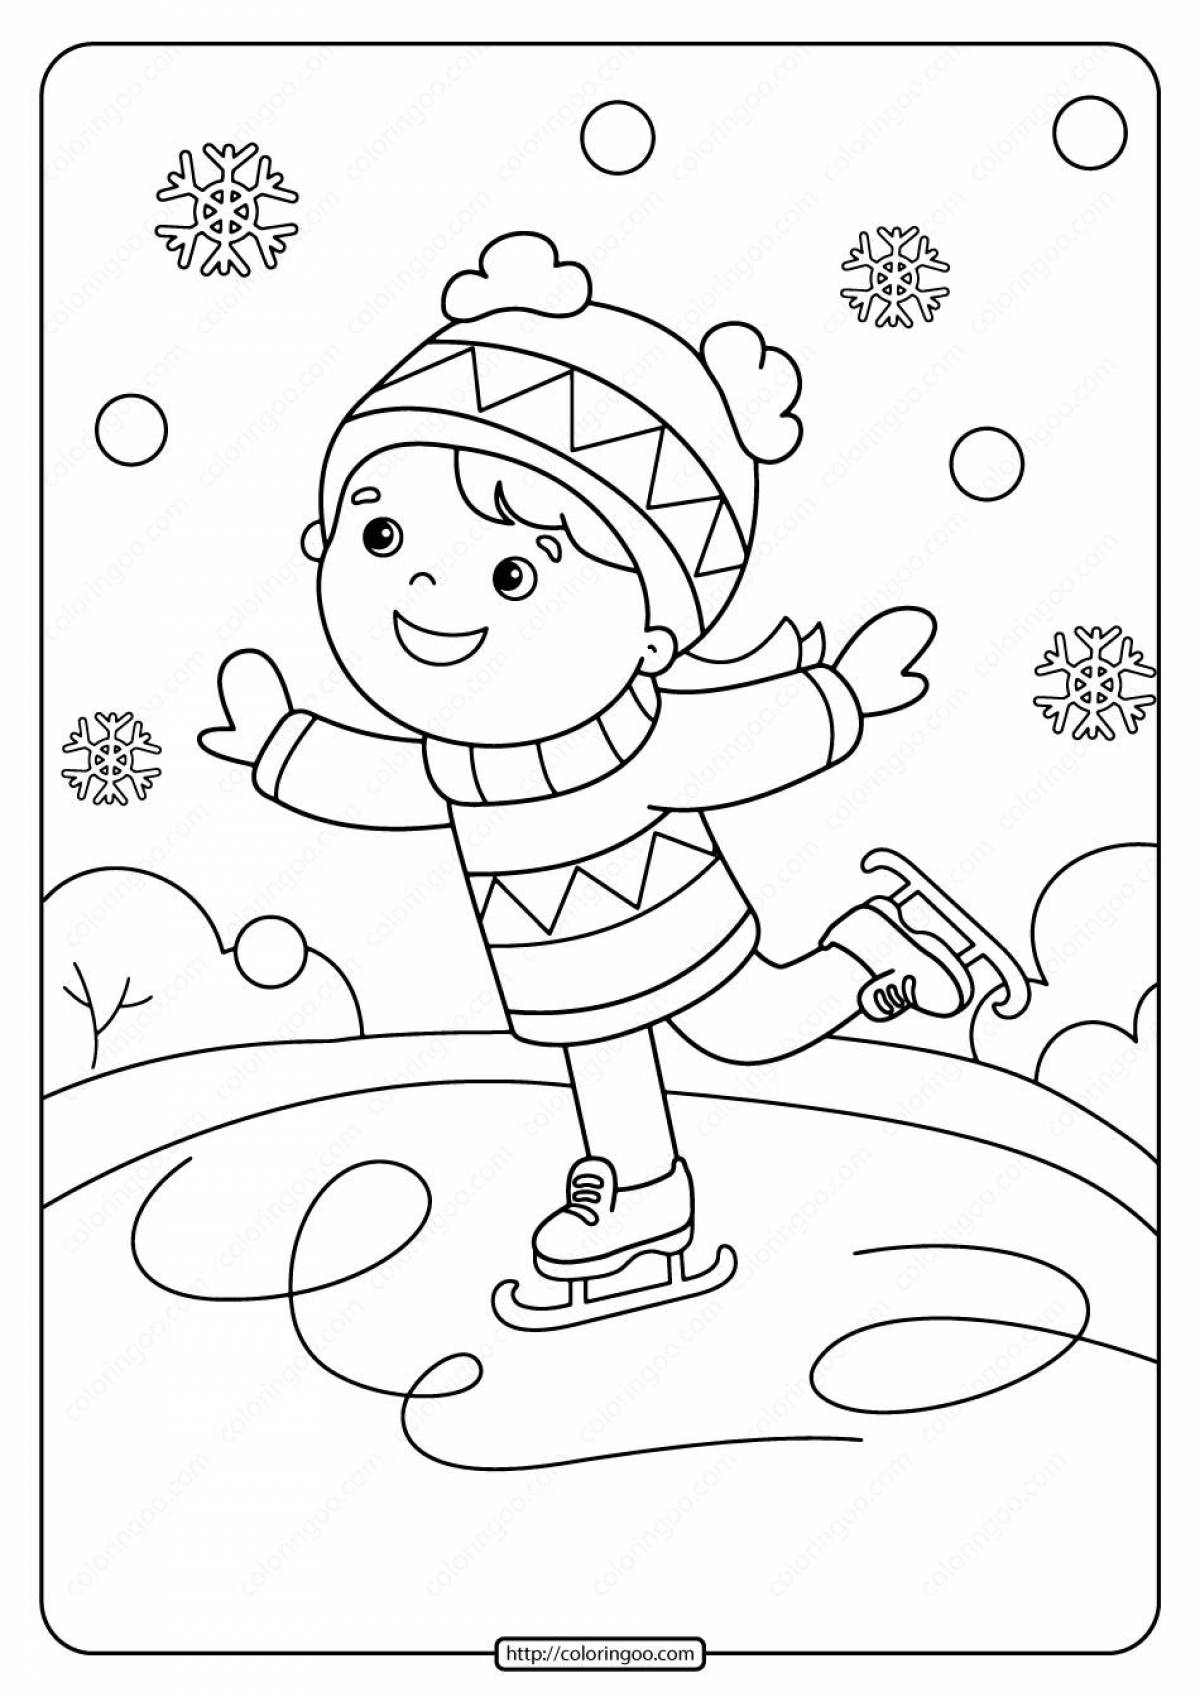 Fun coloring book winter sports for 6-7 year olds